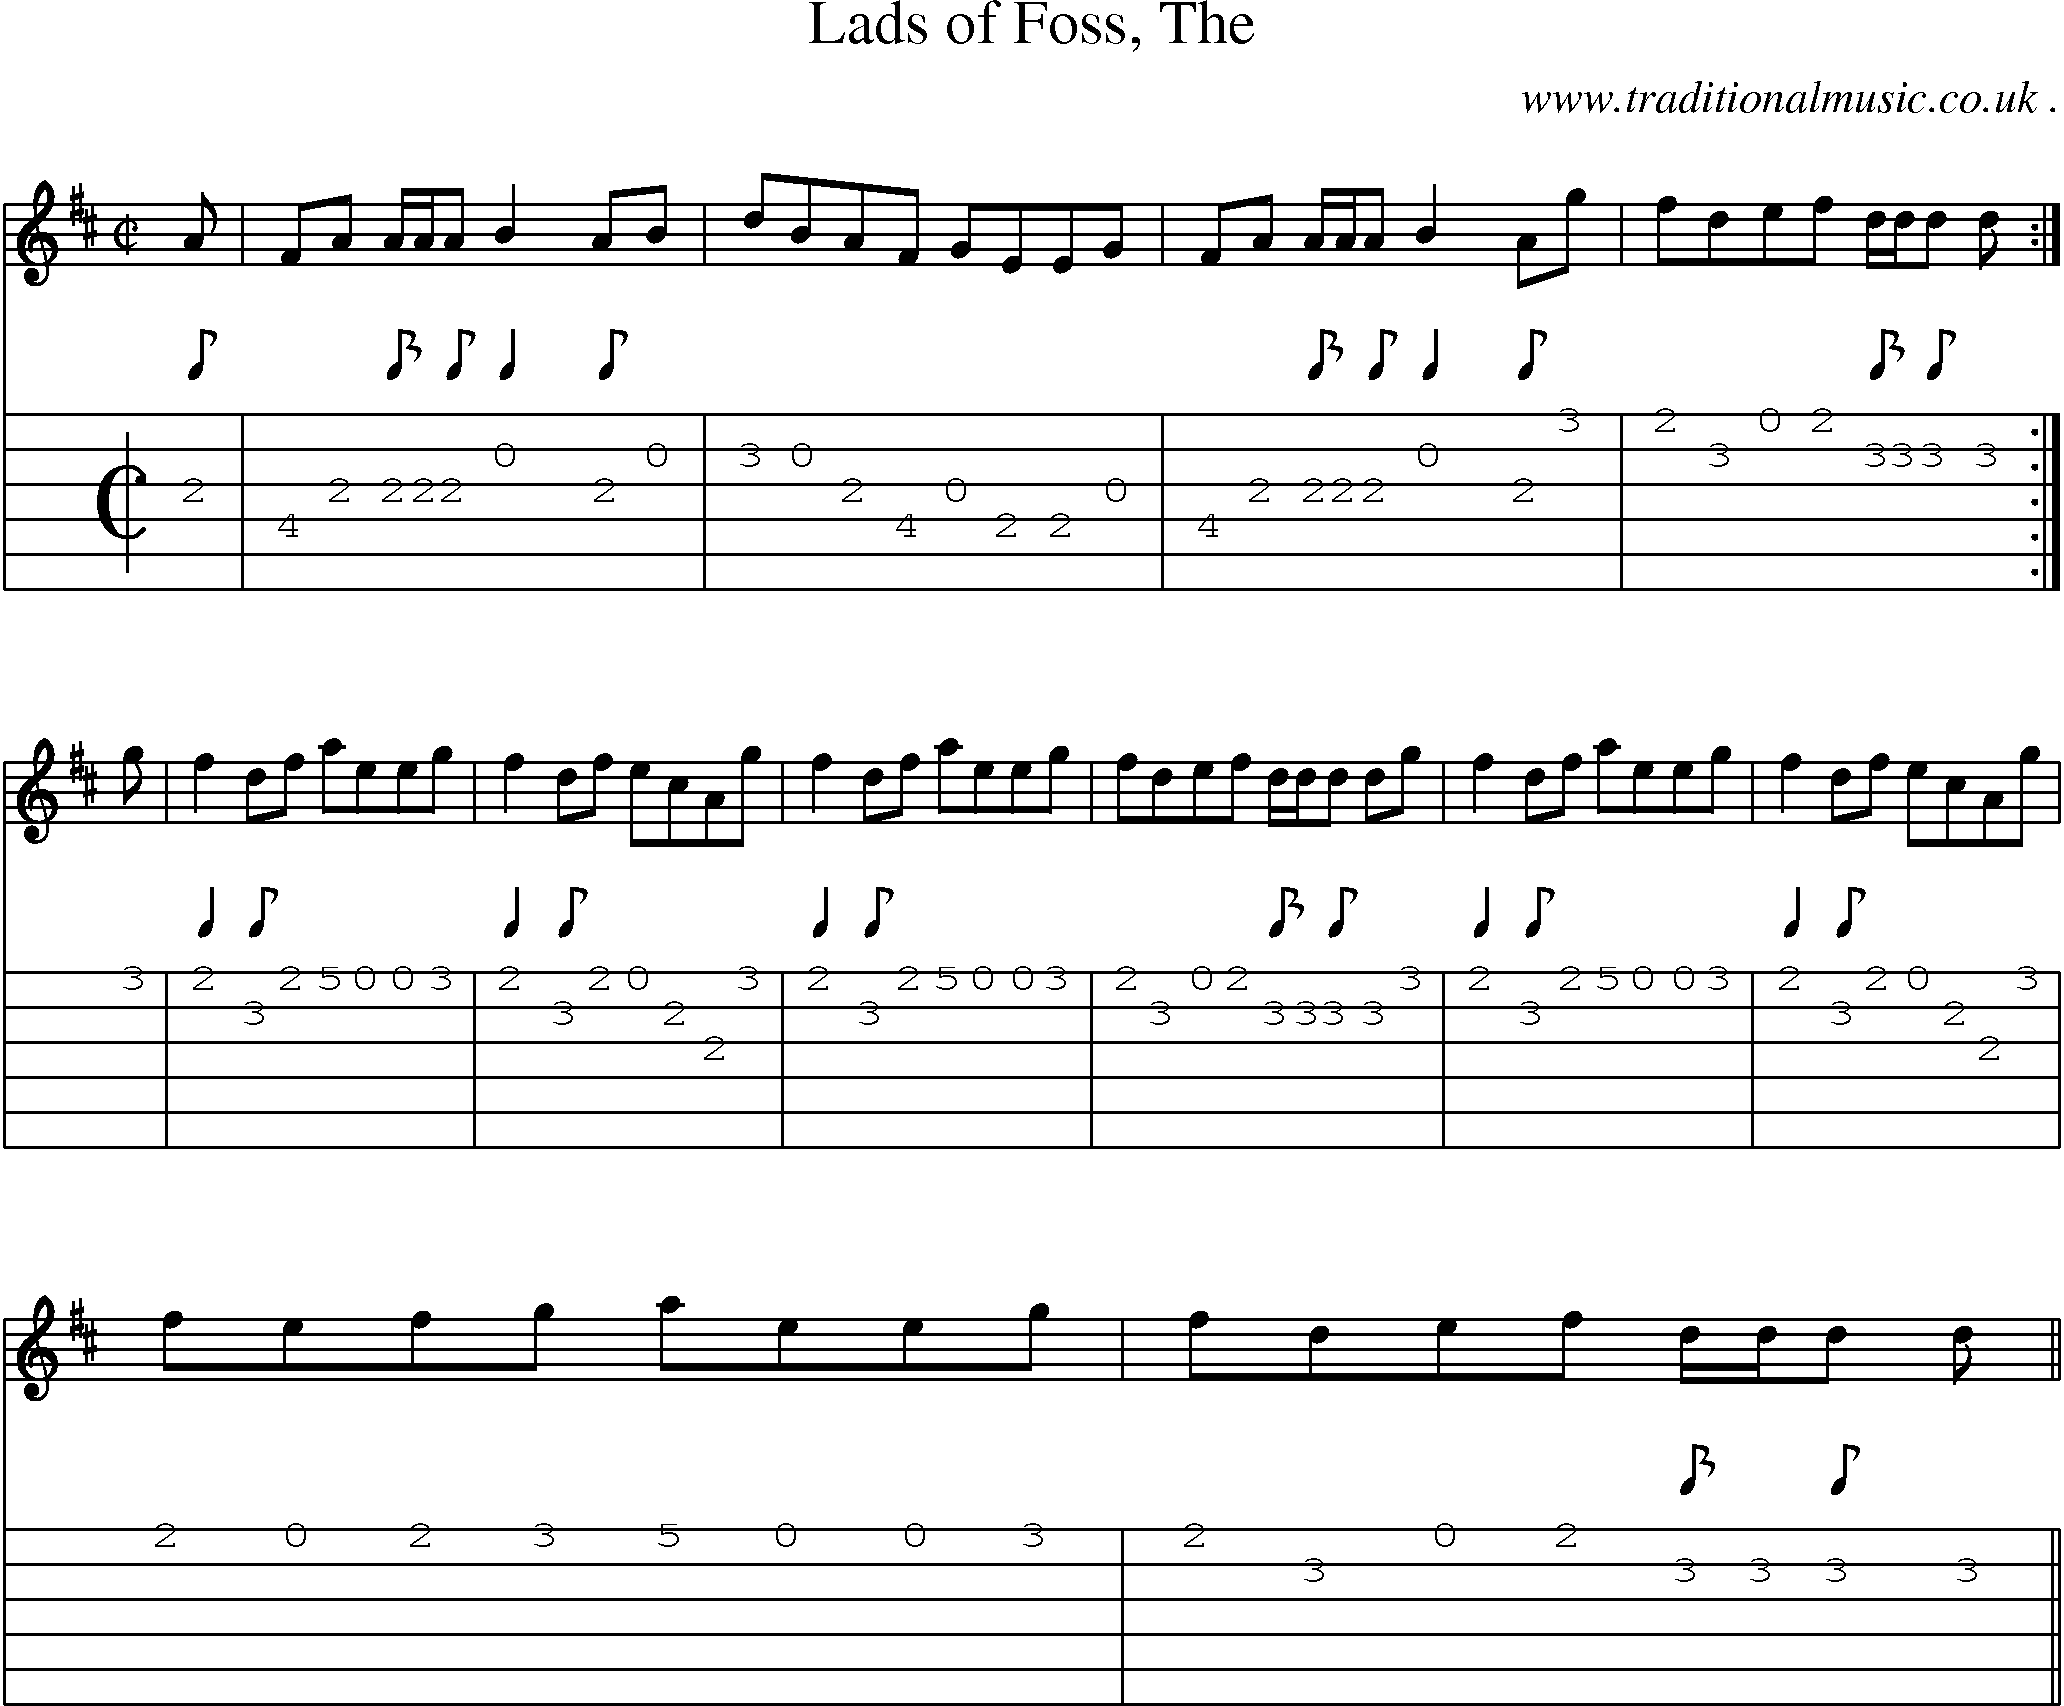 Sheet-music  score, Chords and Guitar Tabs for Lads Of Foss The